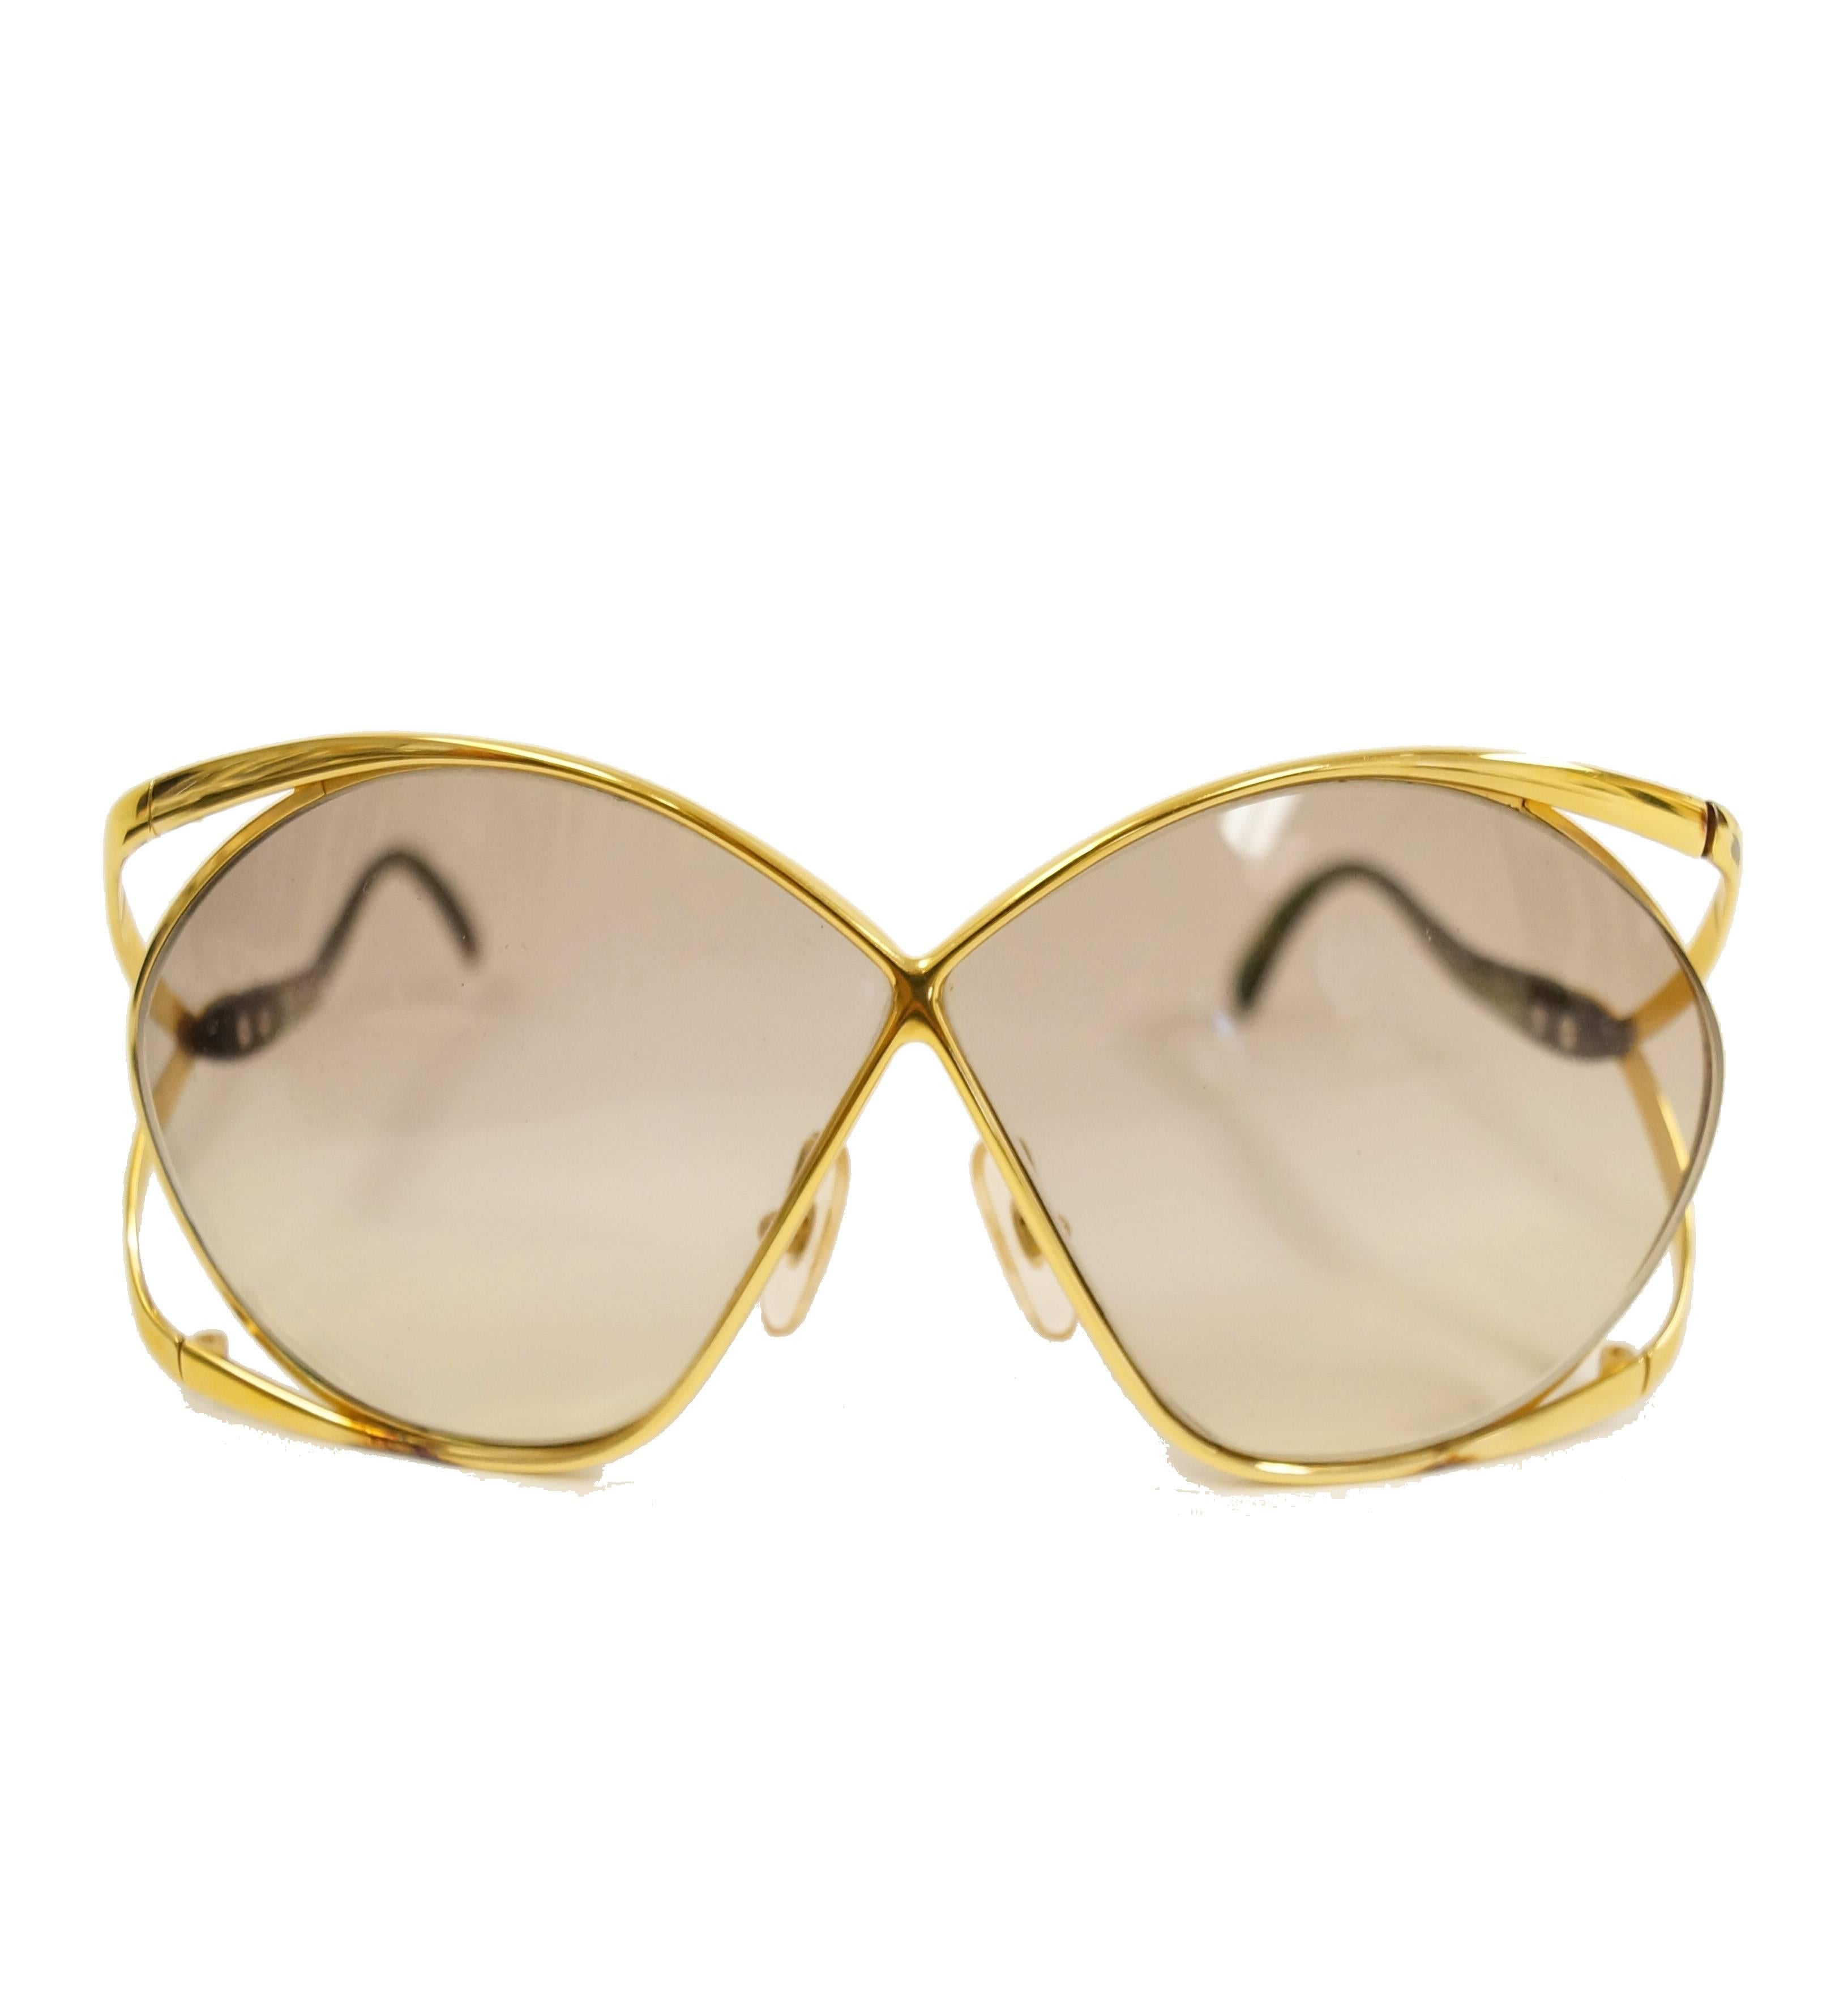 Iconic 1980s Dior butterfly sunglasses! These glamorous, feminine sunglasses showcase Dior's famous butterfly design. The apple green and gold-tone frames gently wrap around the oversized lenses. The letters 